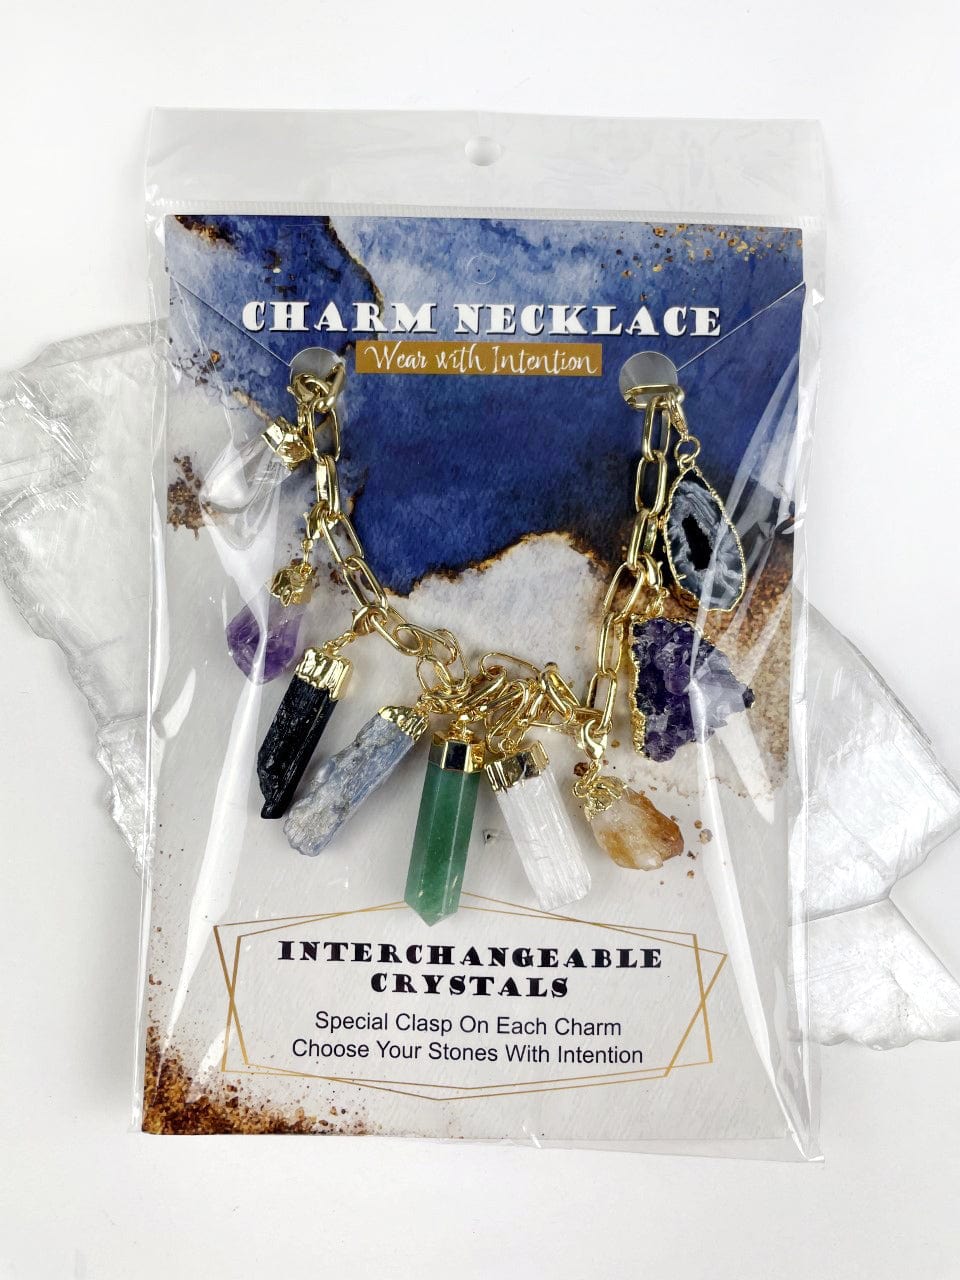 Gemstone and charms Necklace in gold in its packaging on a cute card